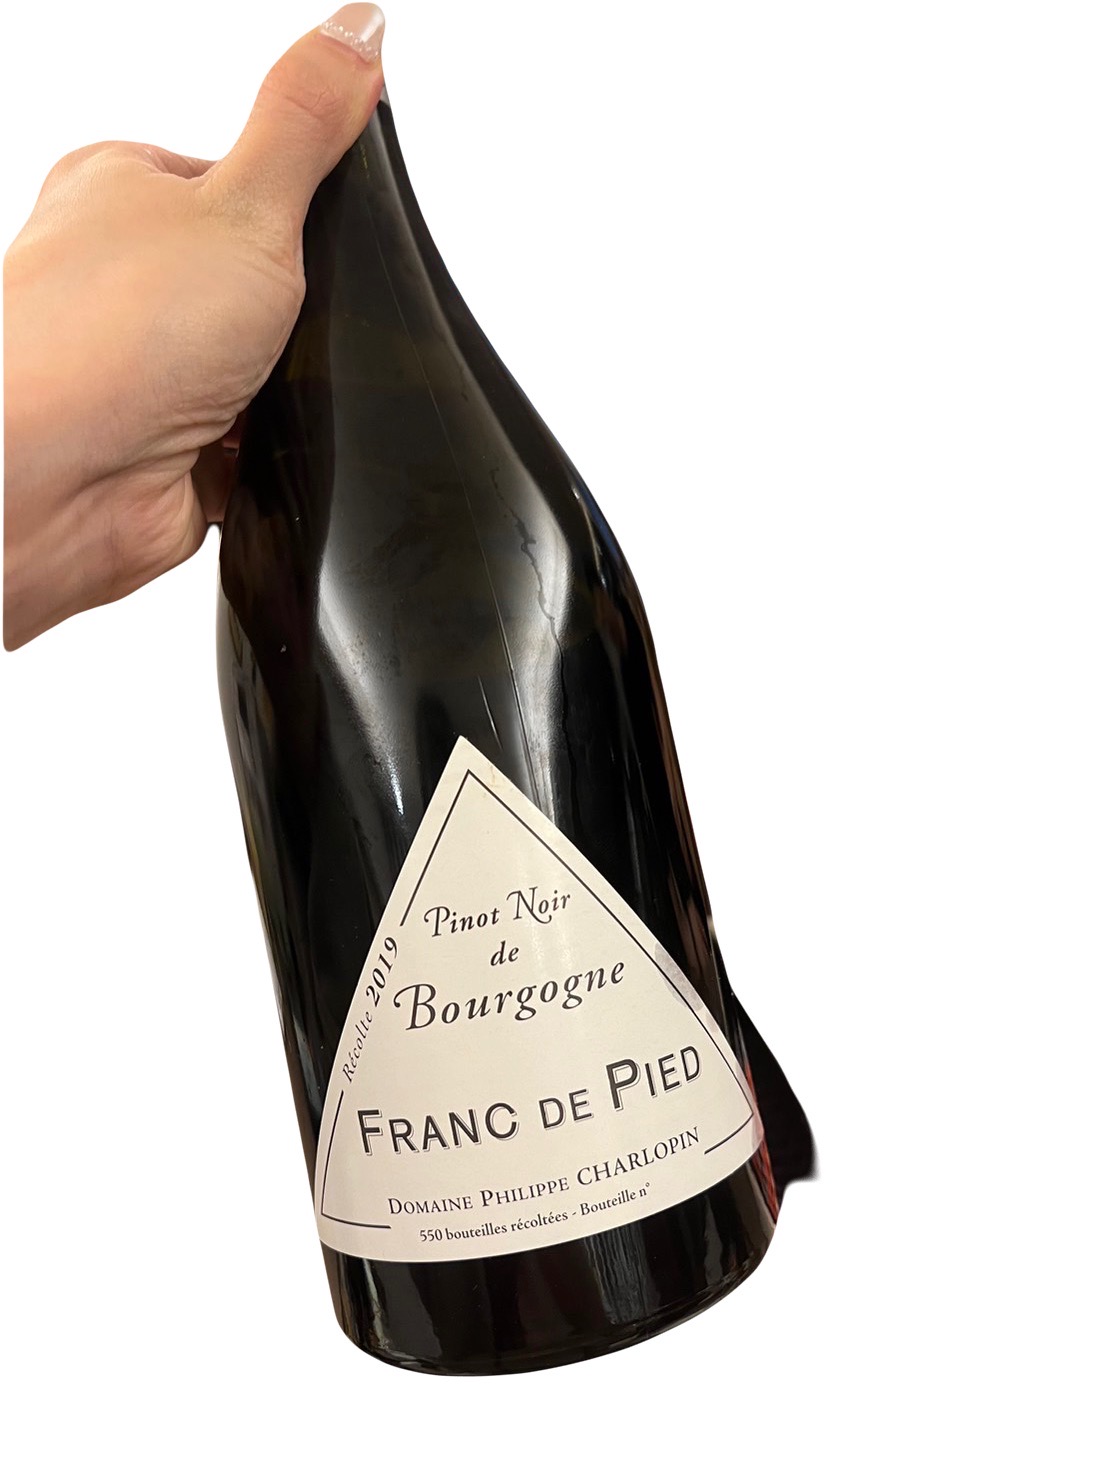 Read more about the article Domaine philippe charlopin Bourgogne Pinot Noir <Franc de Pied>